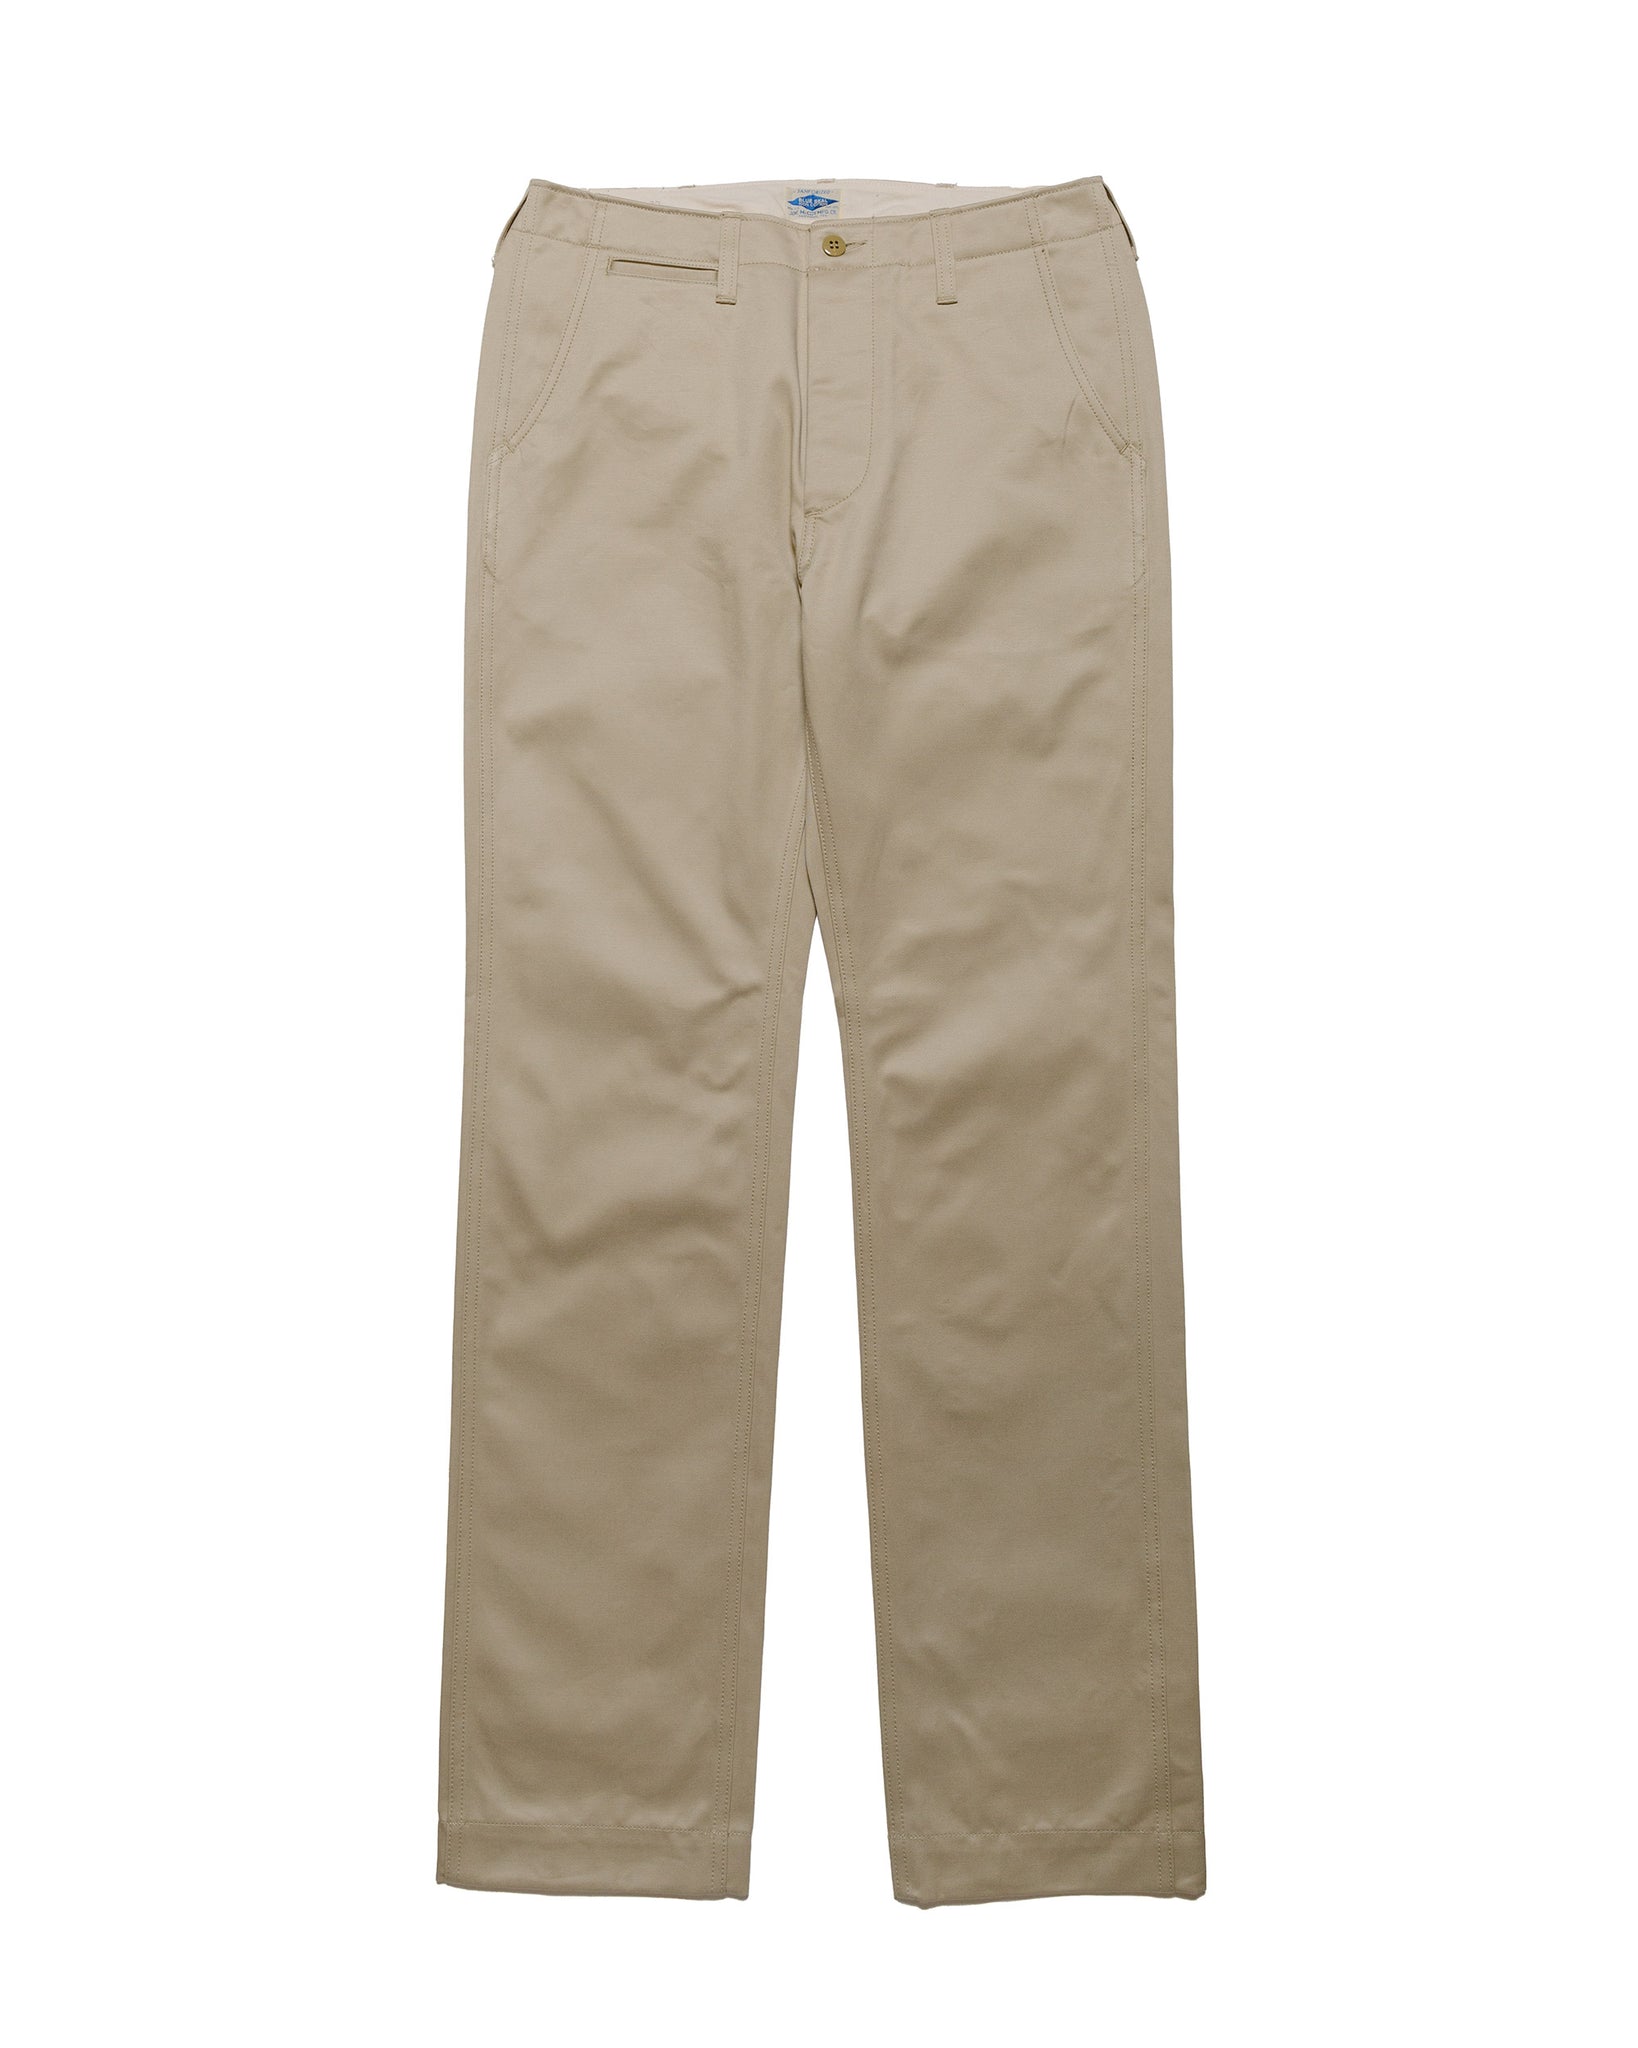 The Real McCoy's MP19010 Blue Seal Chino Trousers Beige